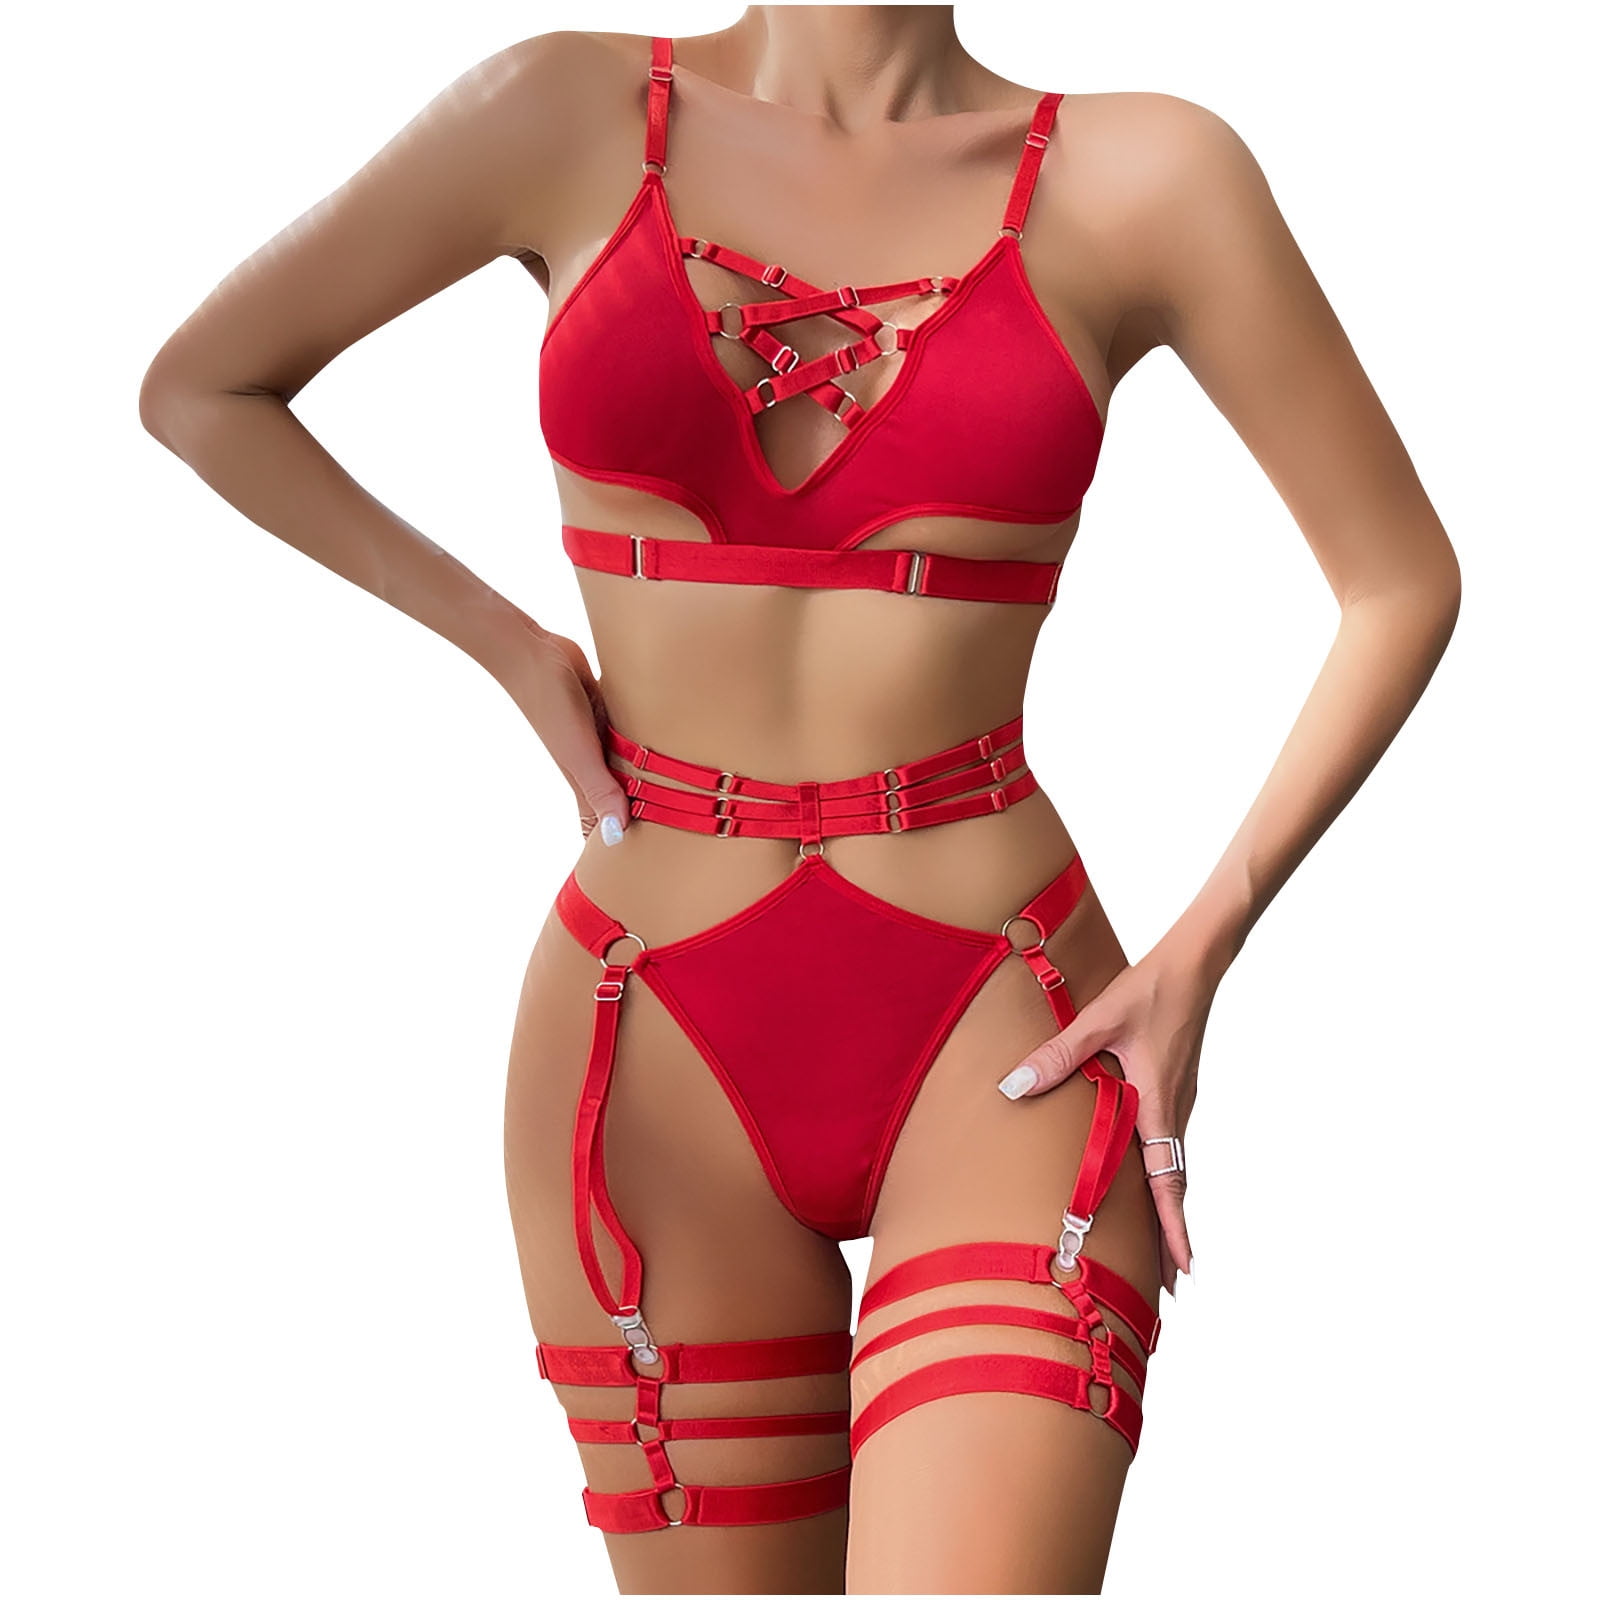 Womens Sexy Red PU Leather Bandage Lingerie Set - The Little